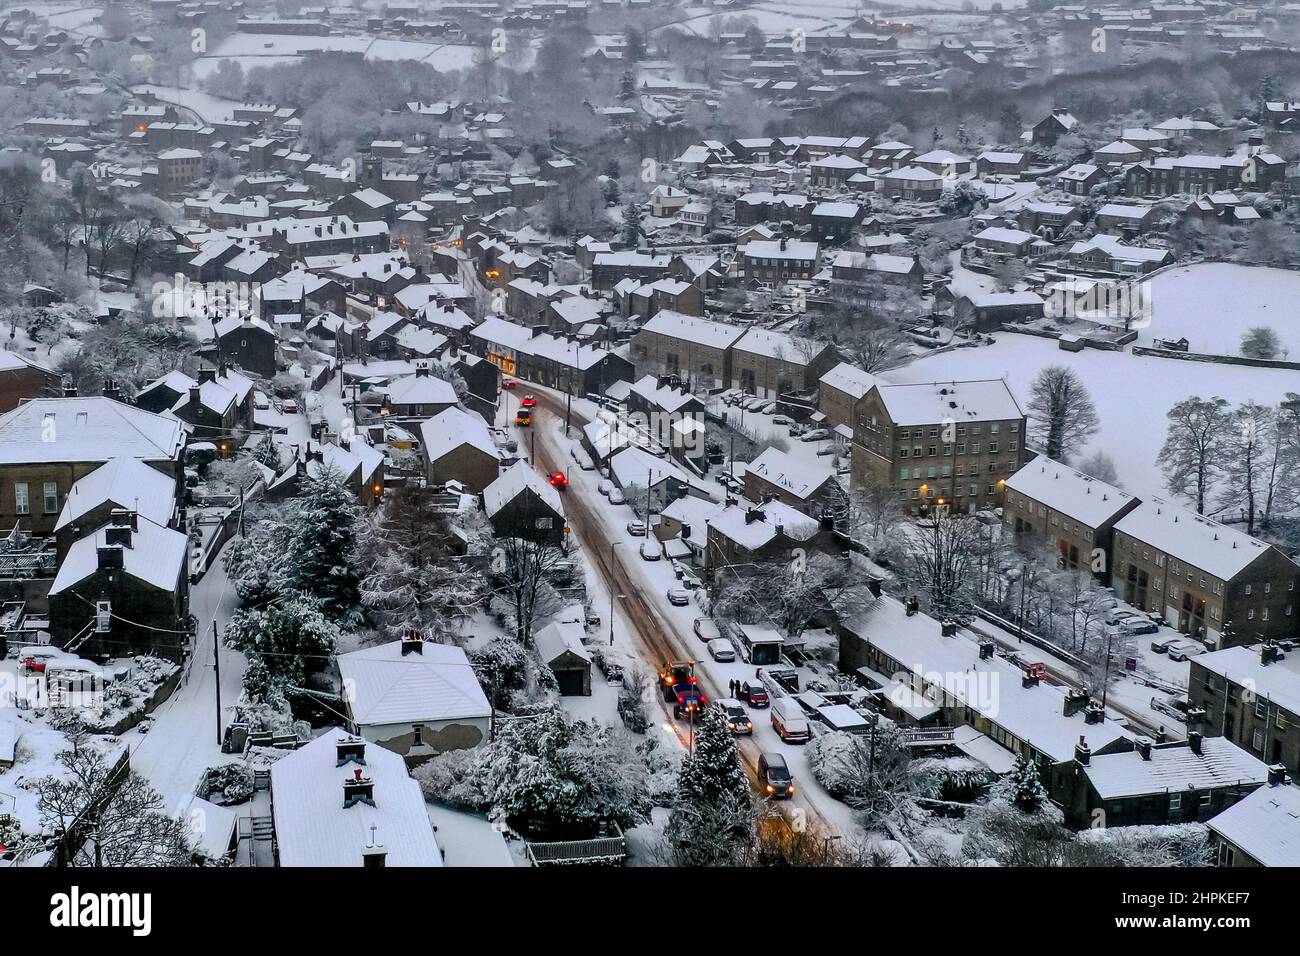 Holmfirth a West Yorkshire Market Town based at the bottom of the Pennines, is hit by wintery weather conditions. Cars struggle to negotiate the slipp Stock Photo